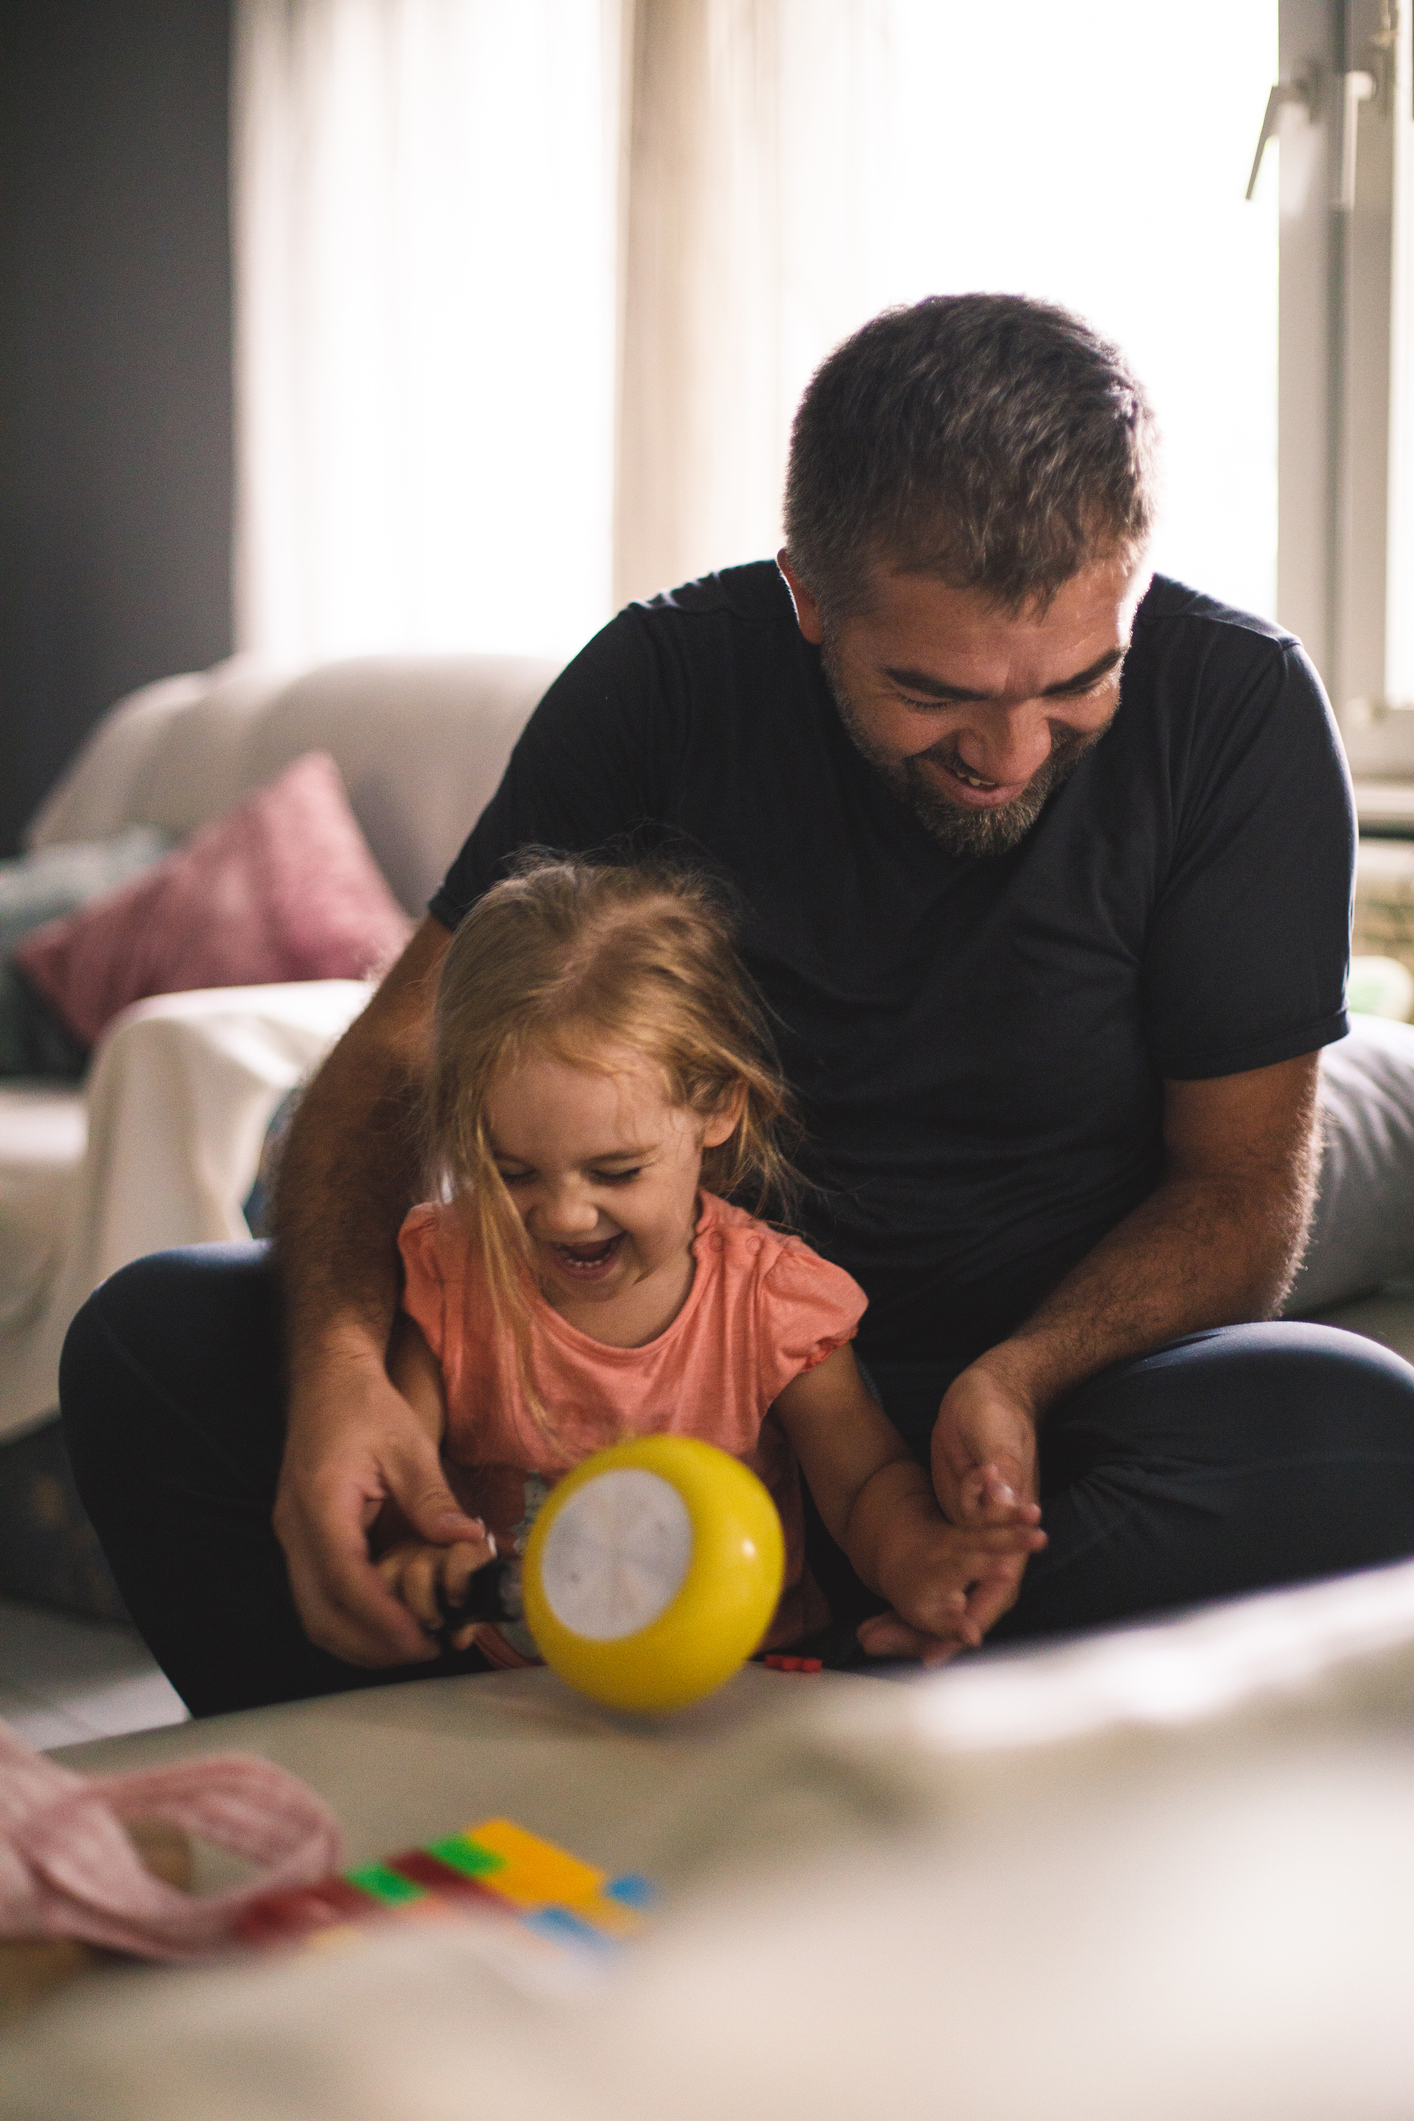 Joyful father and daughter having fun while playing with toys together